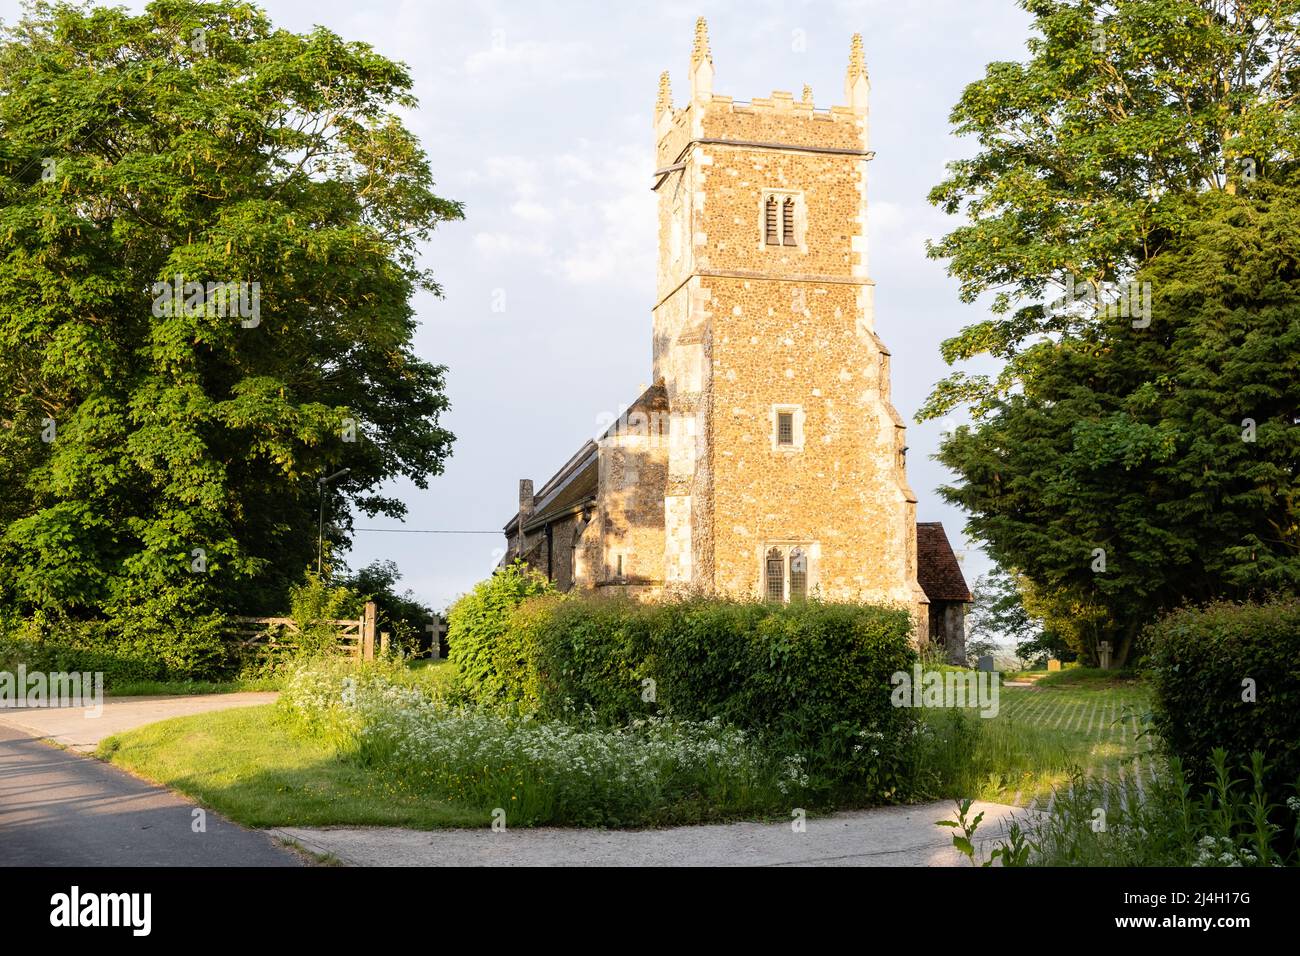 The church and churchyard of the Anglican Parish Church of St. Stephen in the Essex village of Great Wigborough. Stock Photo